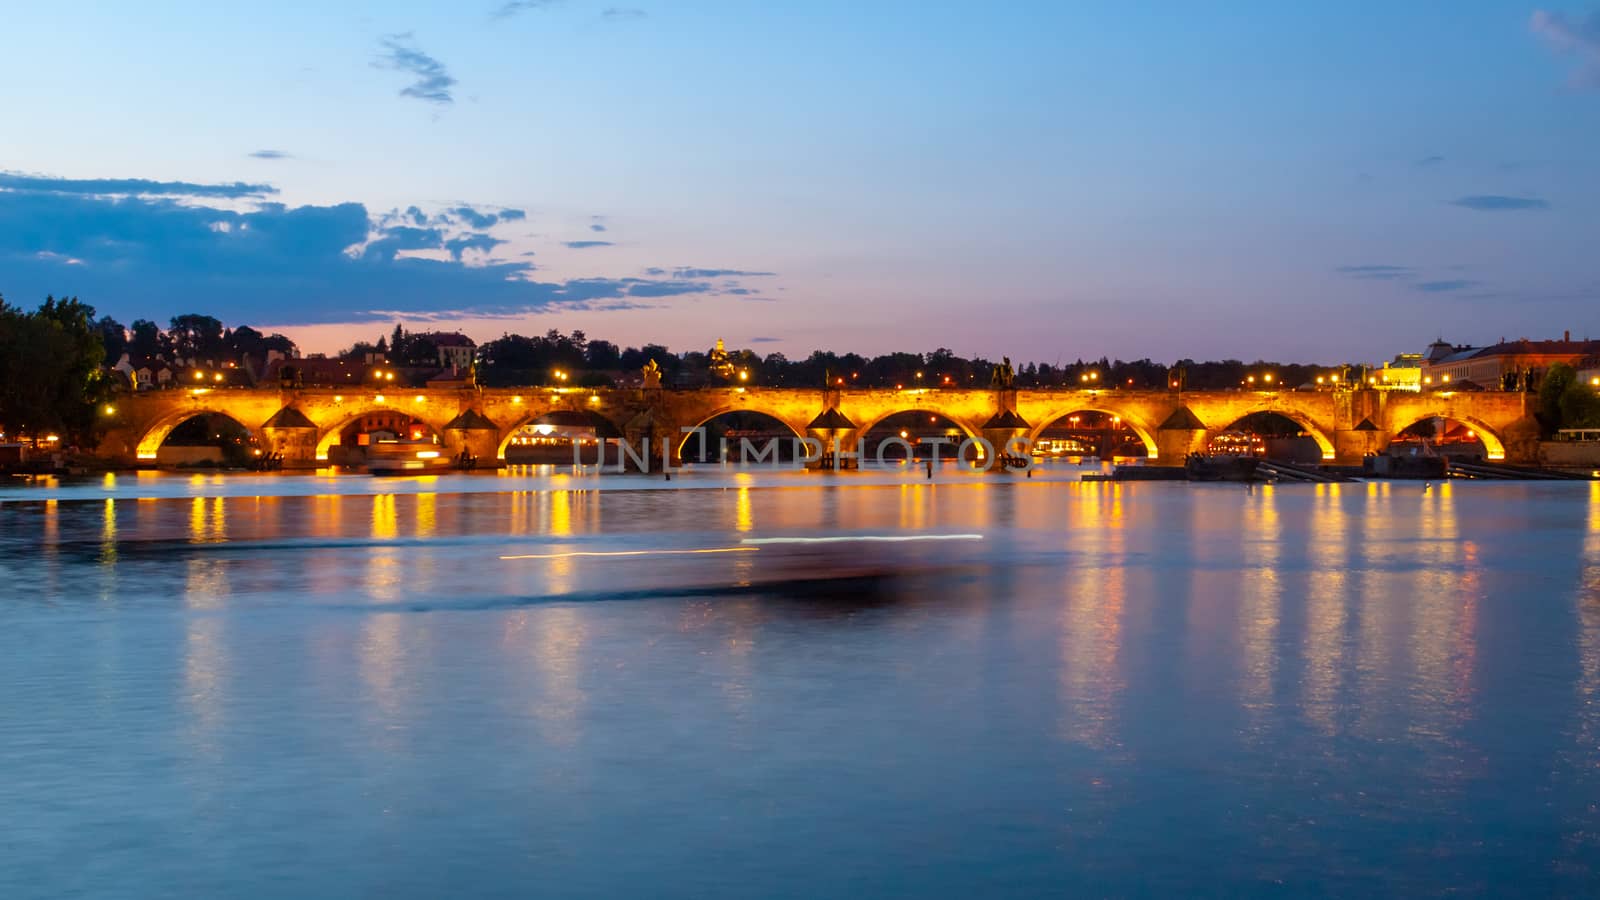 Illuminated Charles Bridge reflected in Vltava River by night. Prague, Czech Republic by pyty